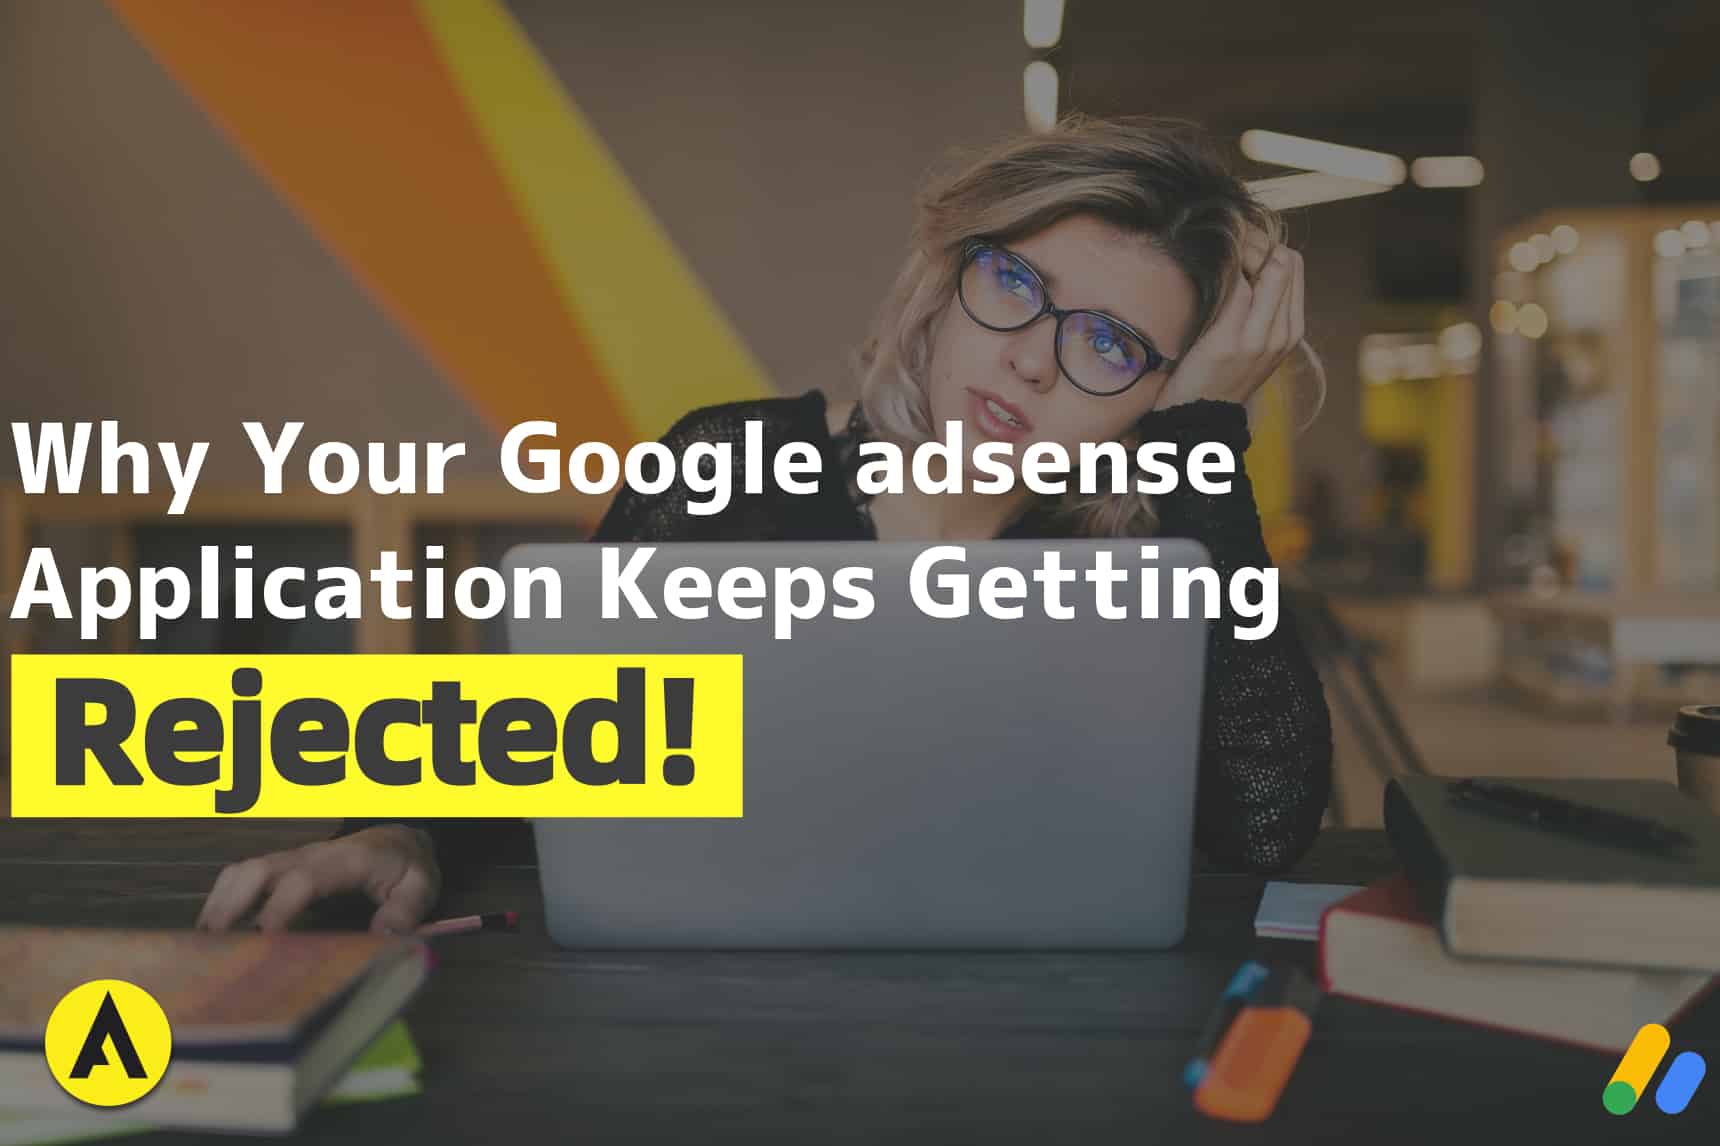 Google Adsense Application Rejected: How to Get Approved! 1